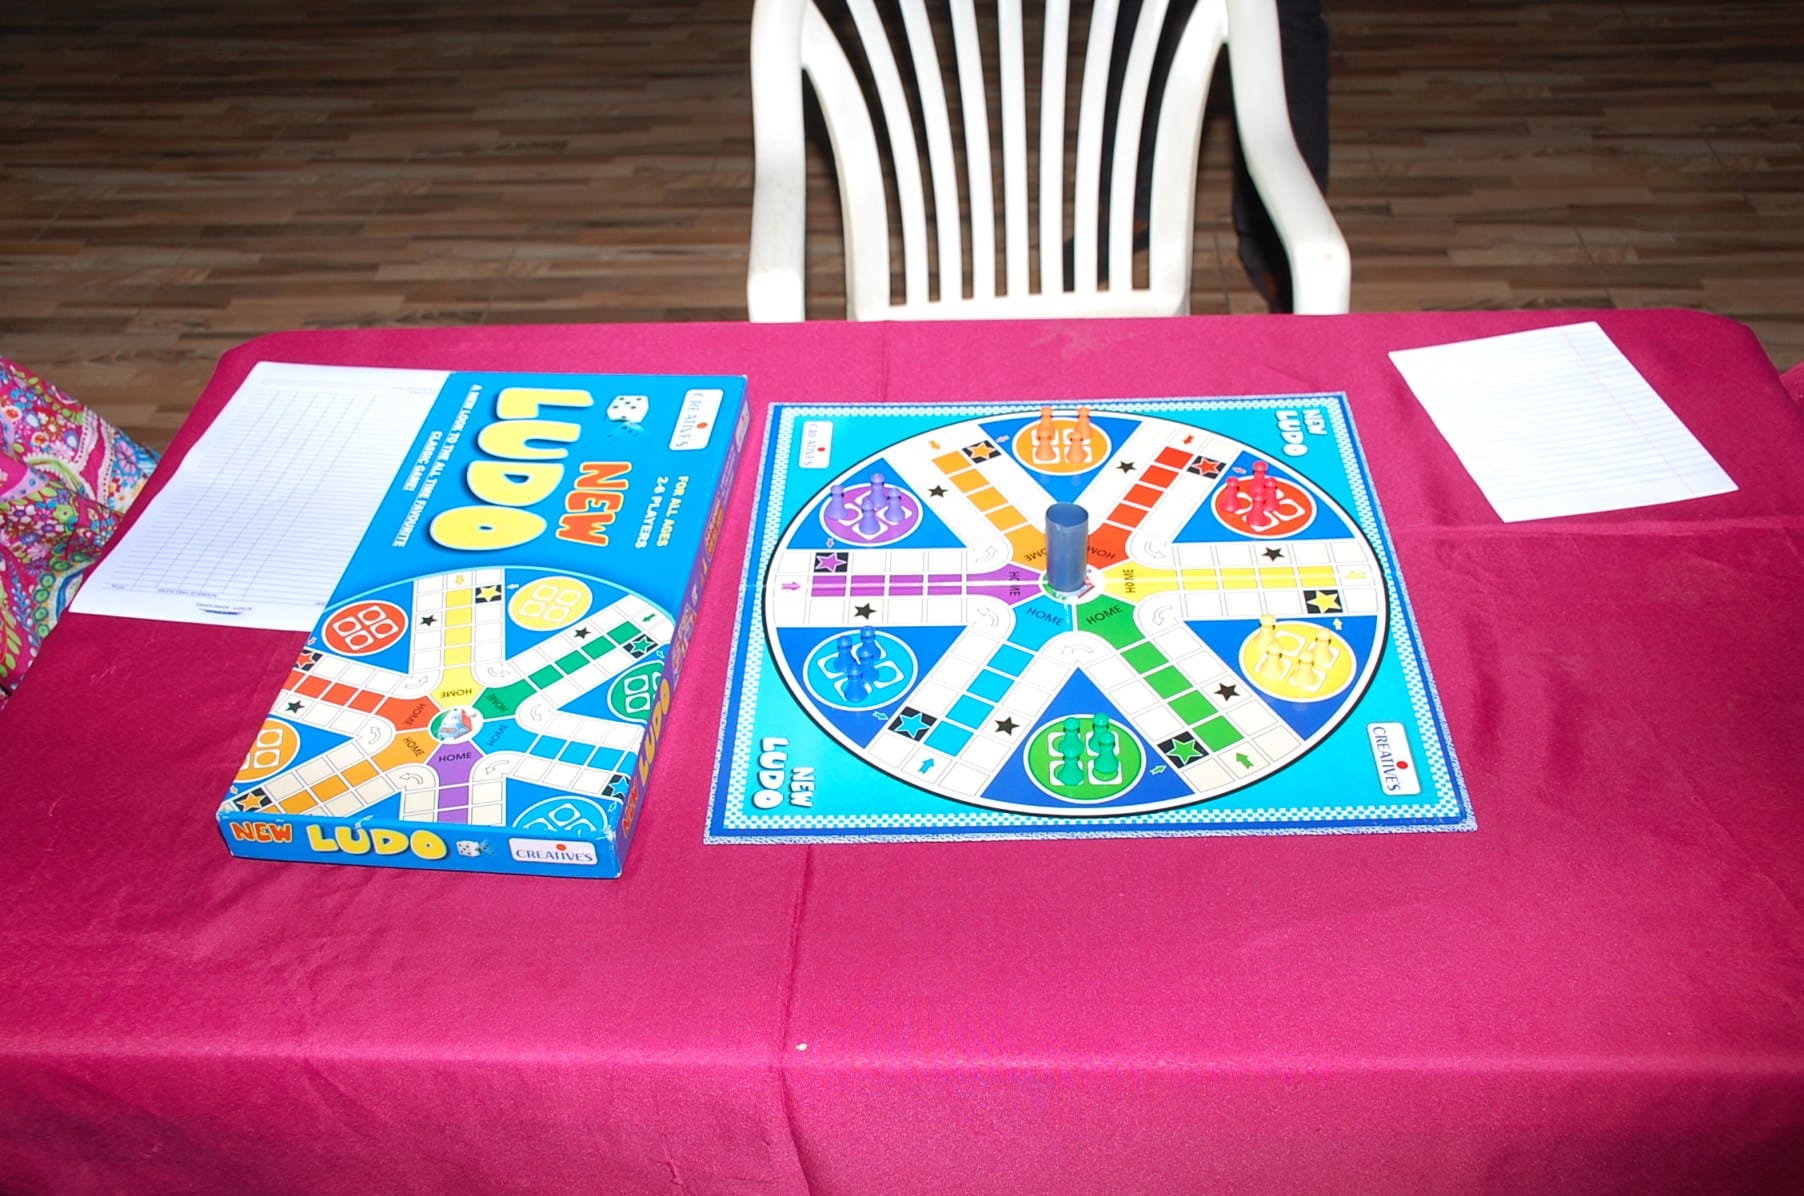 Ludo and other board games were also available for enjoyment